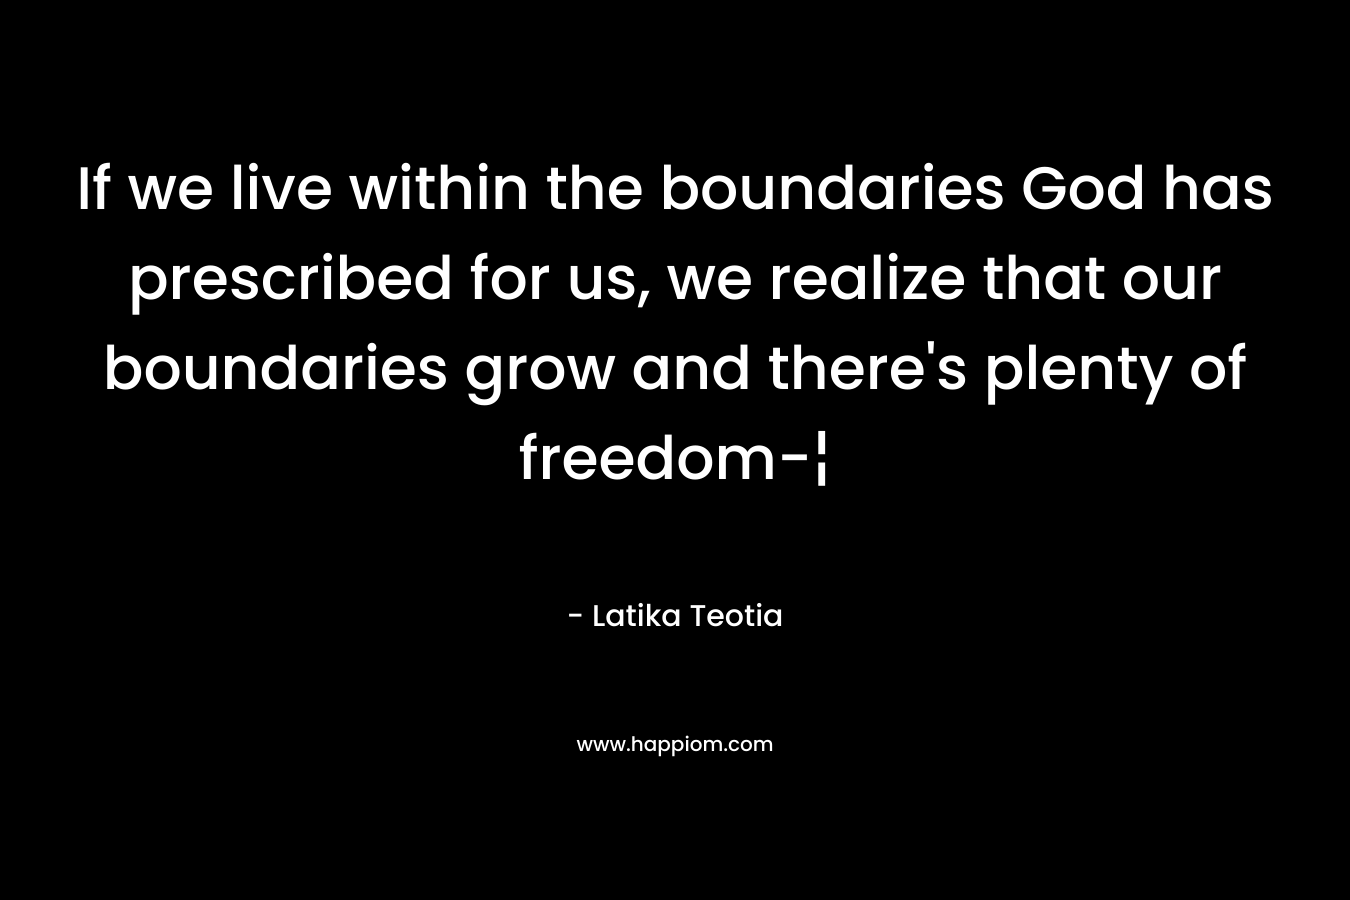 If we live within the boundaries God has prescribed for us, we realize that our boundaries grow and there's plenty of freedom-¦